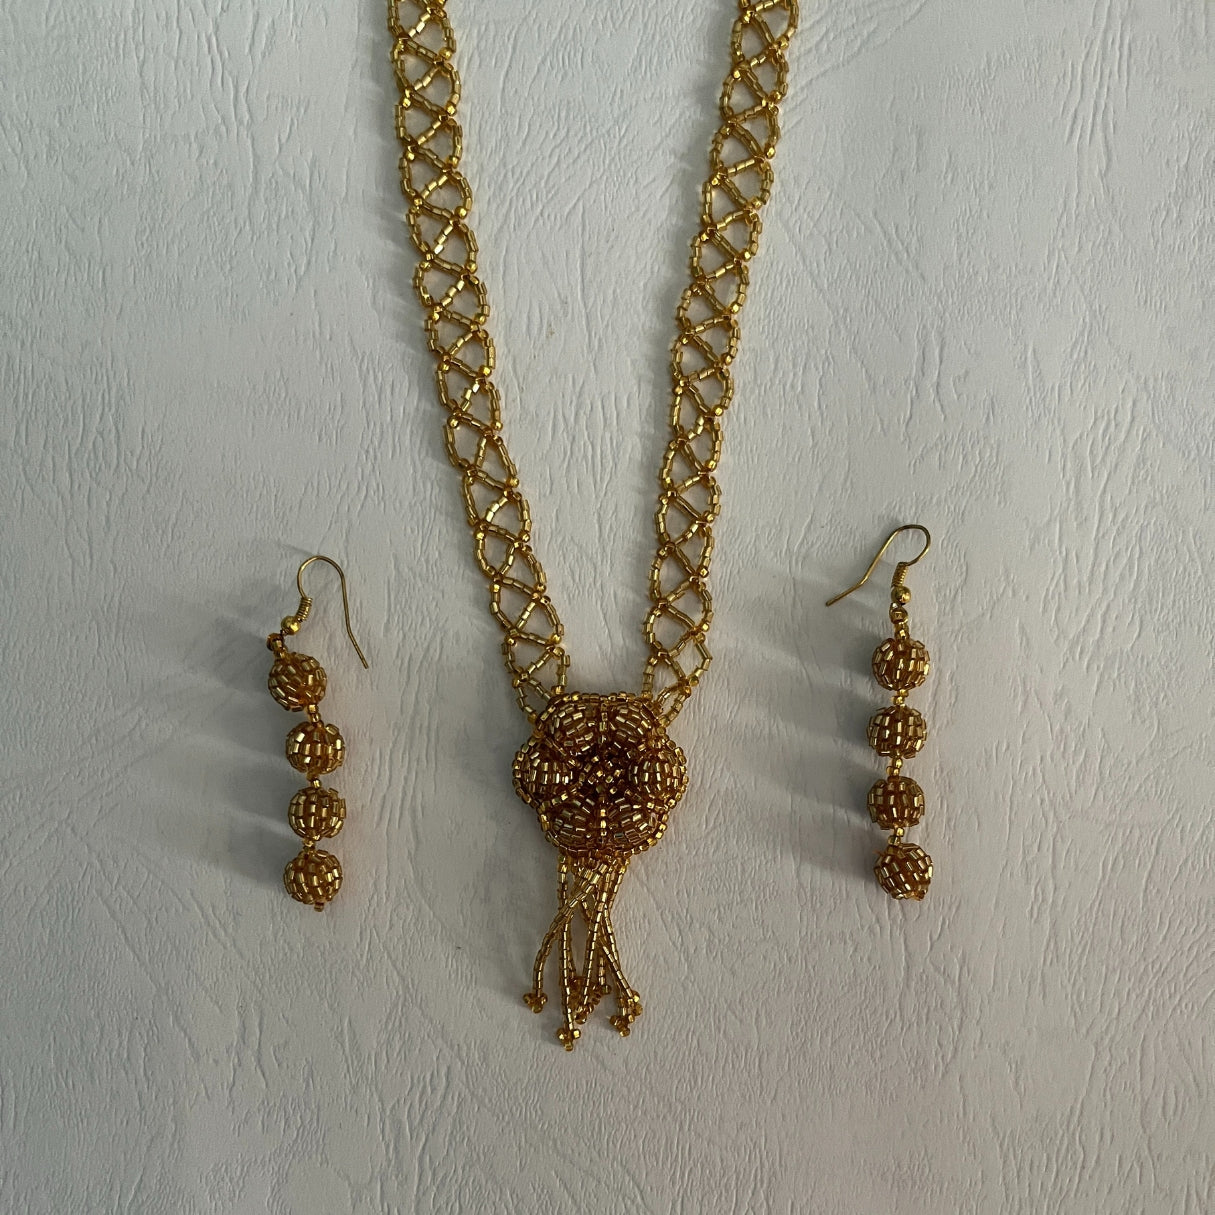 Saipatri Gold Braided Potay Necklace Set with Earrings